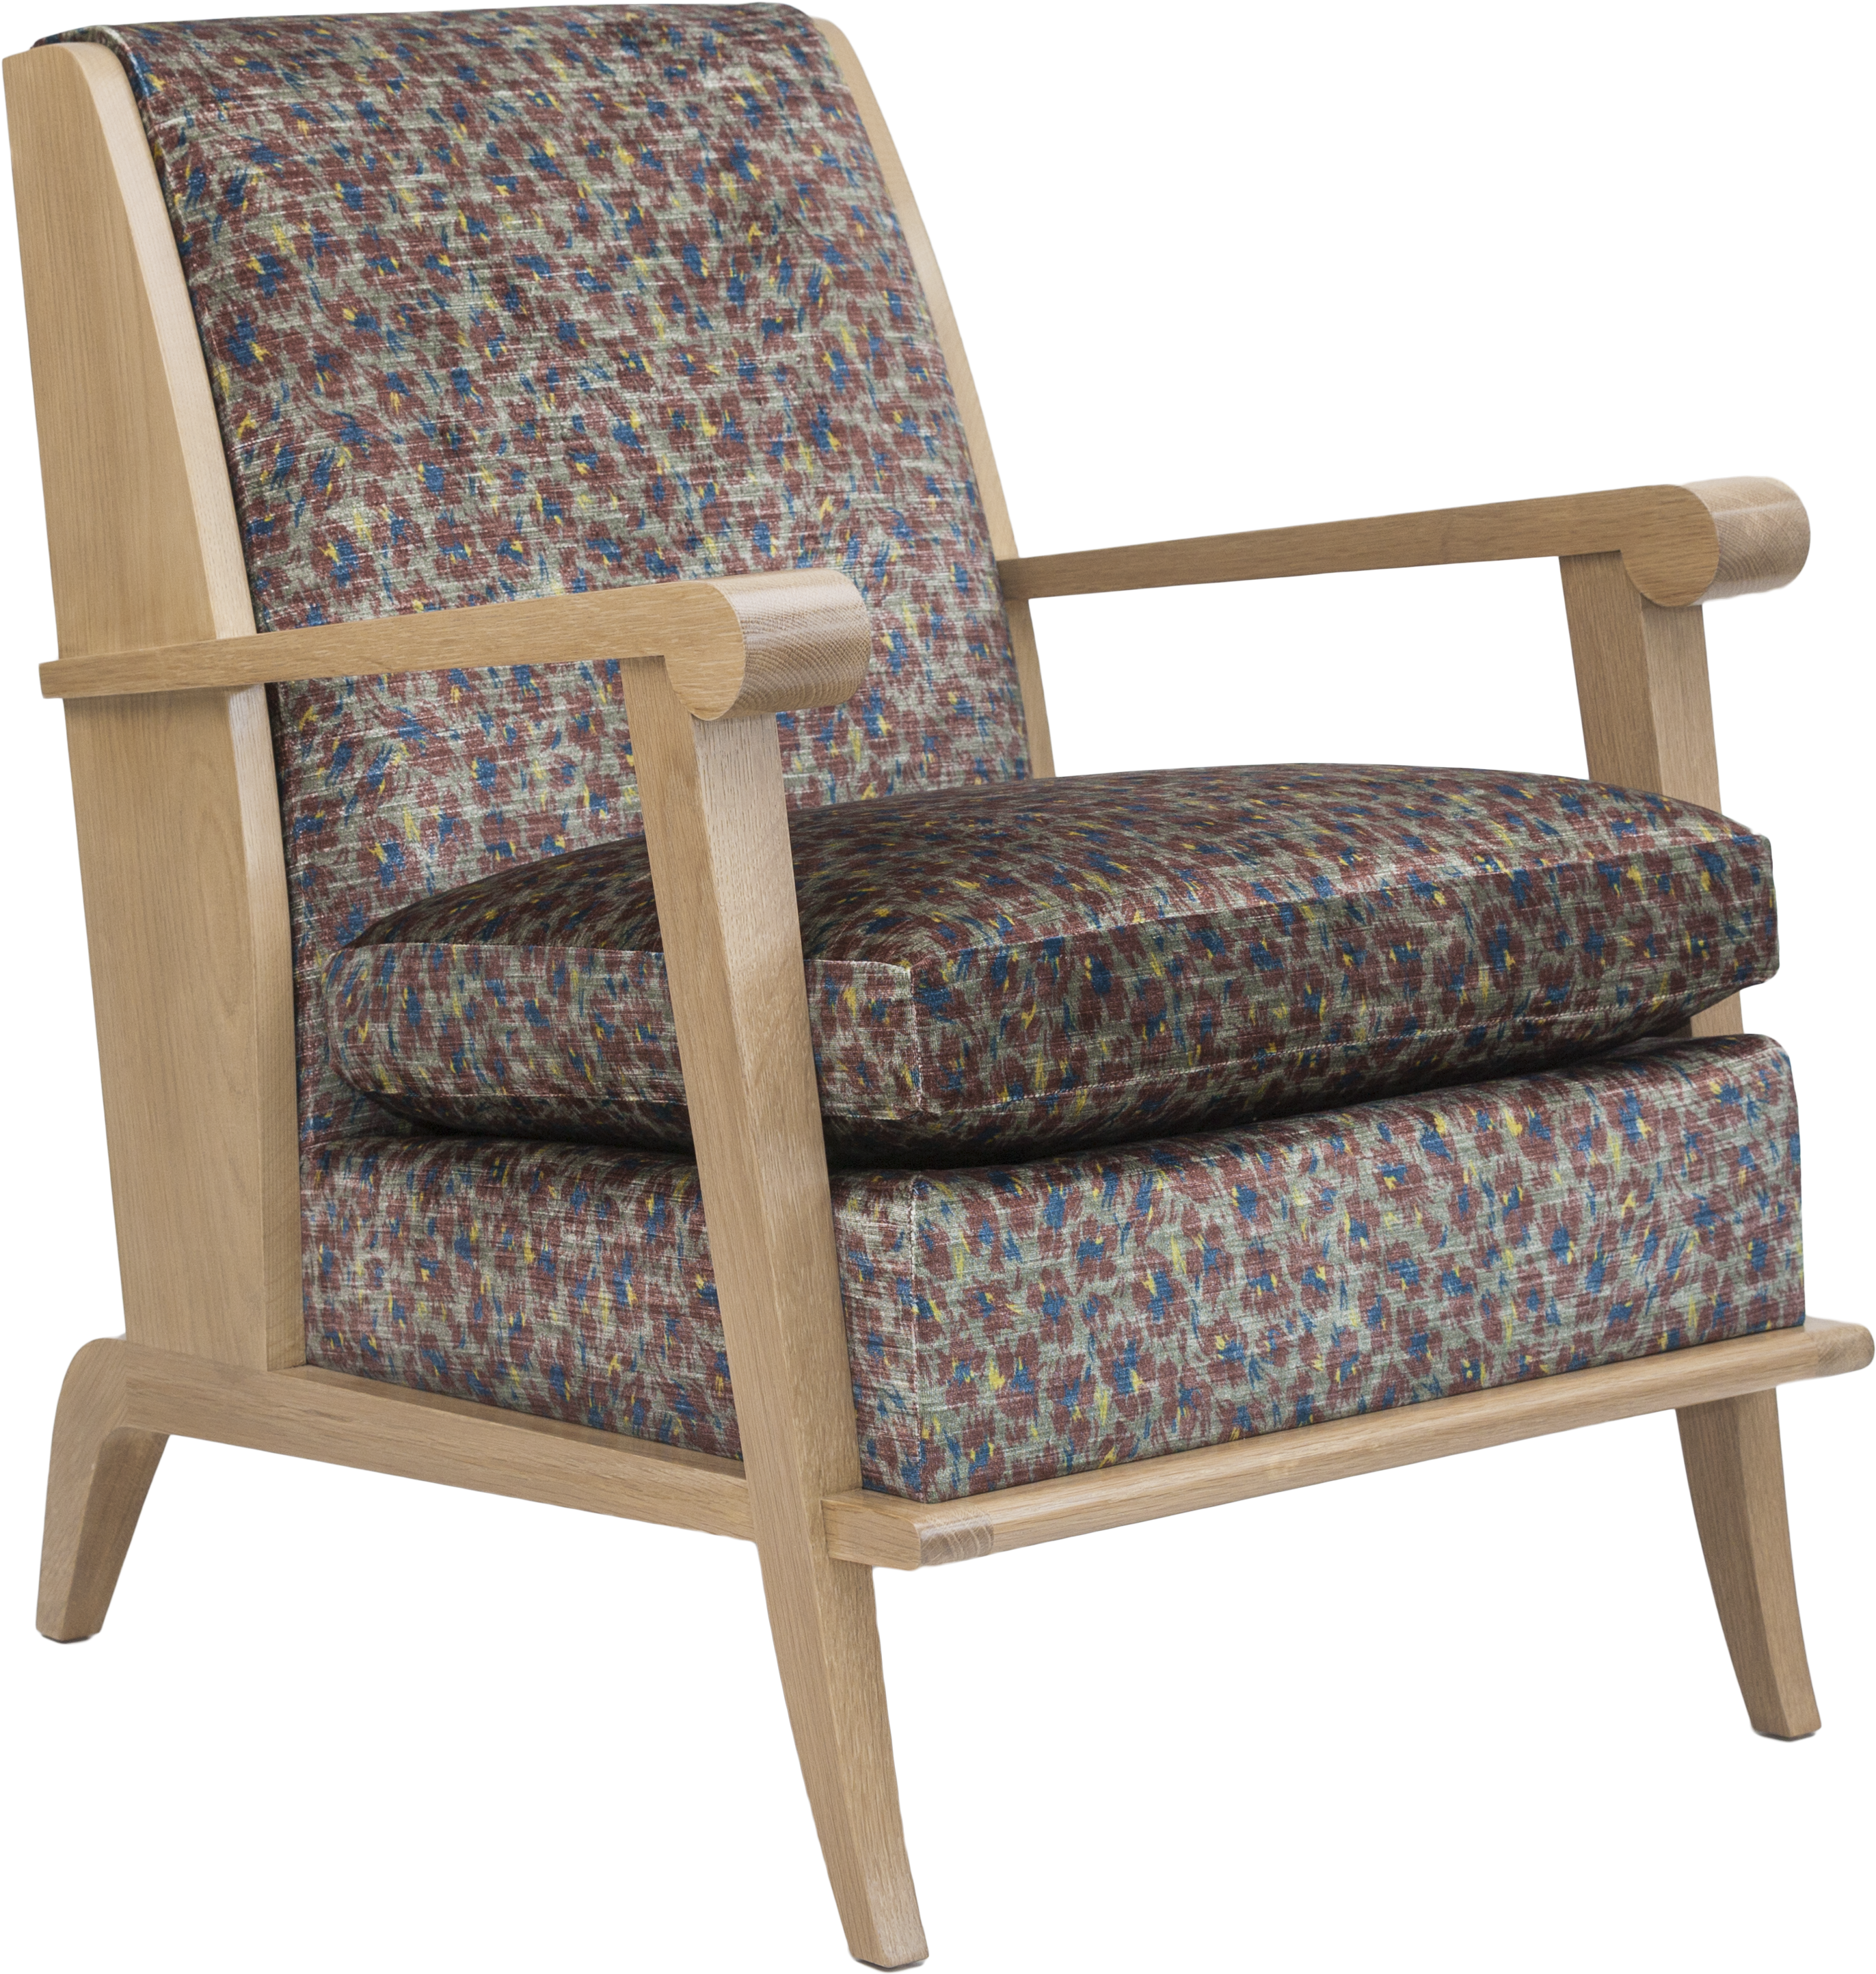 Modern Club Chairwith Patterned Upholstery